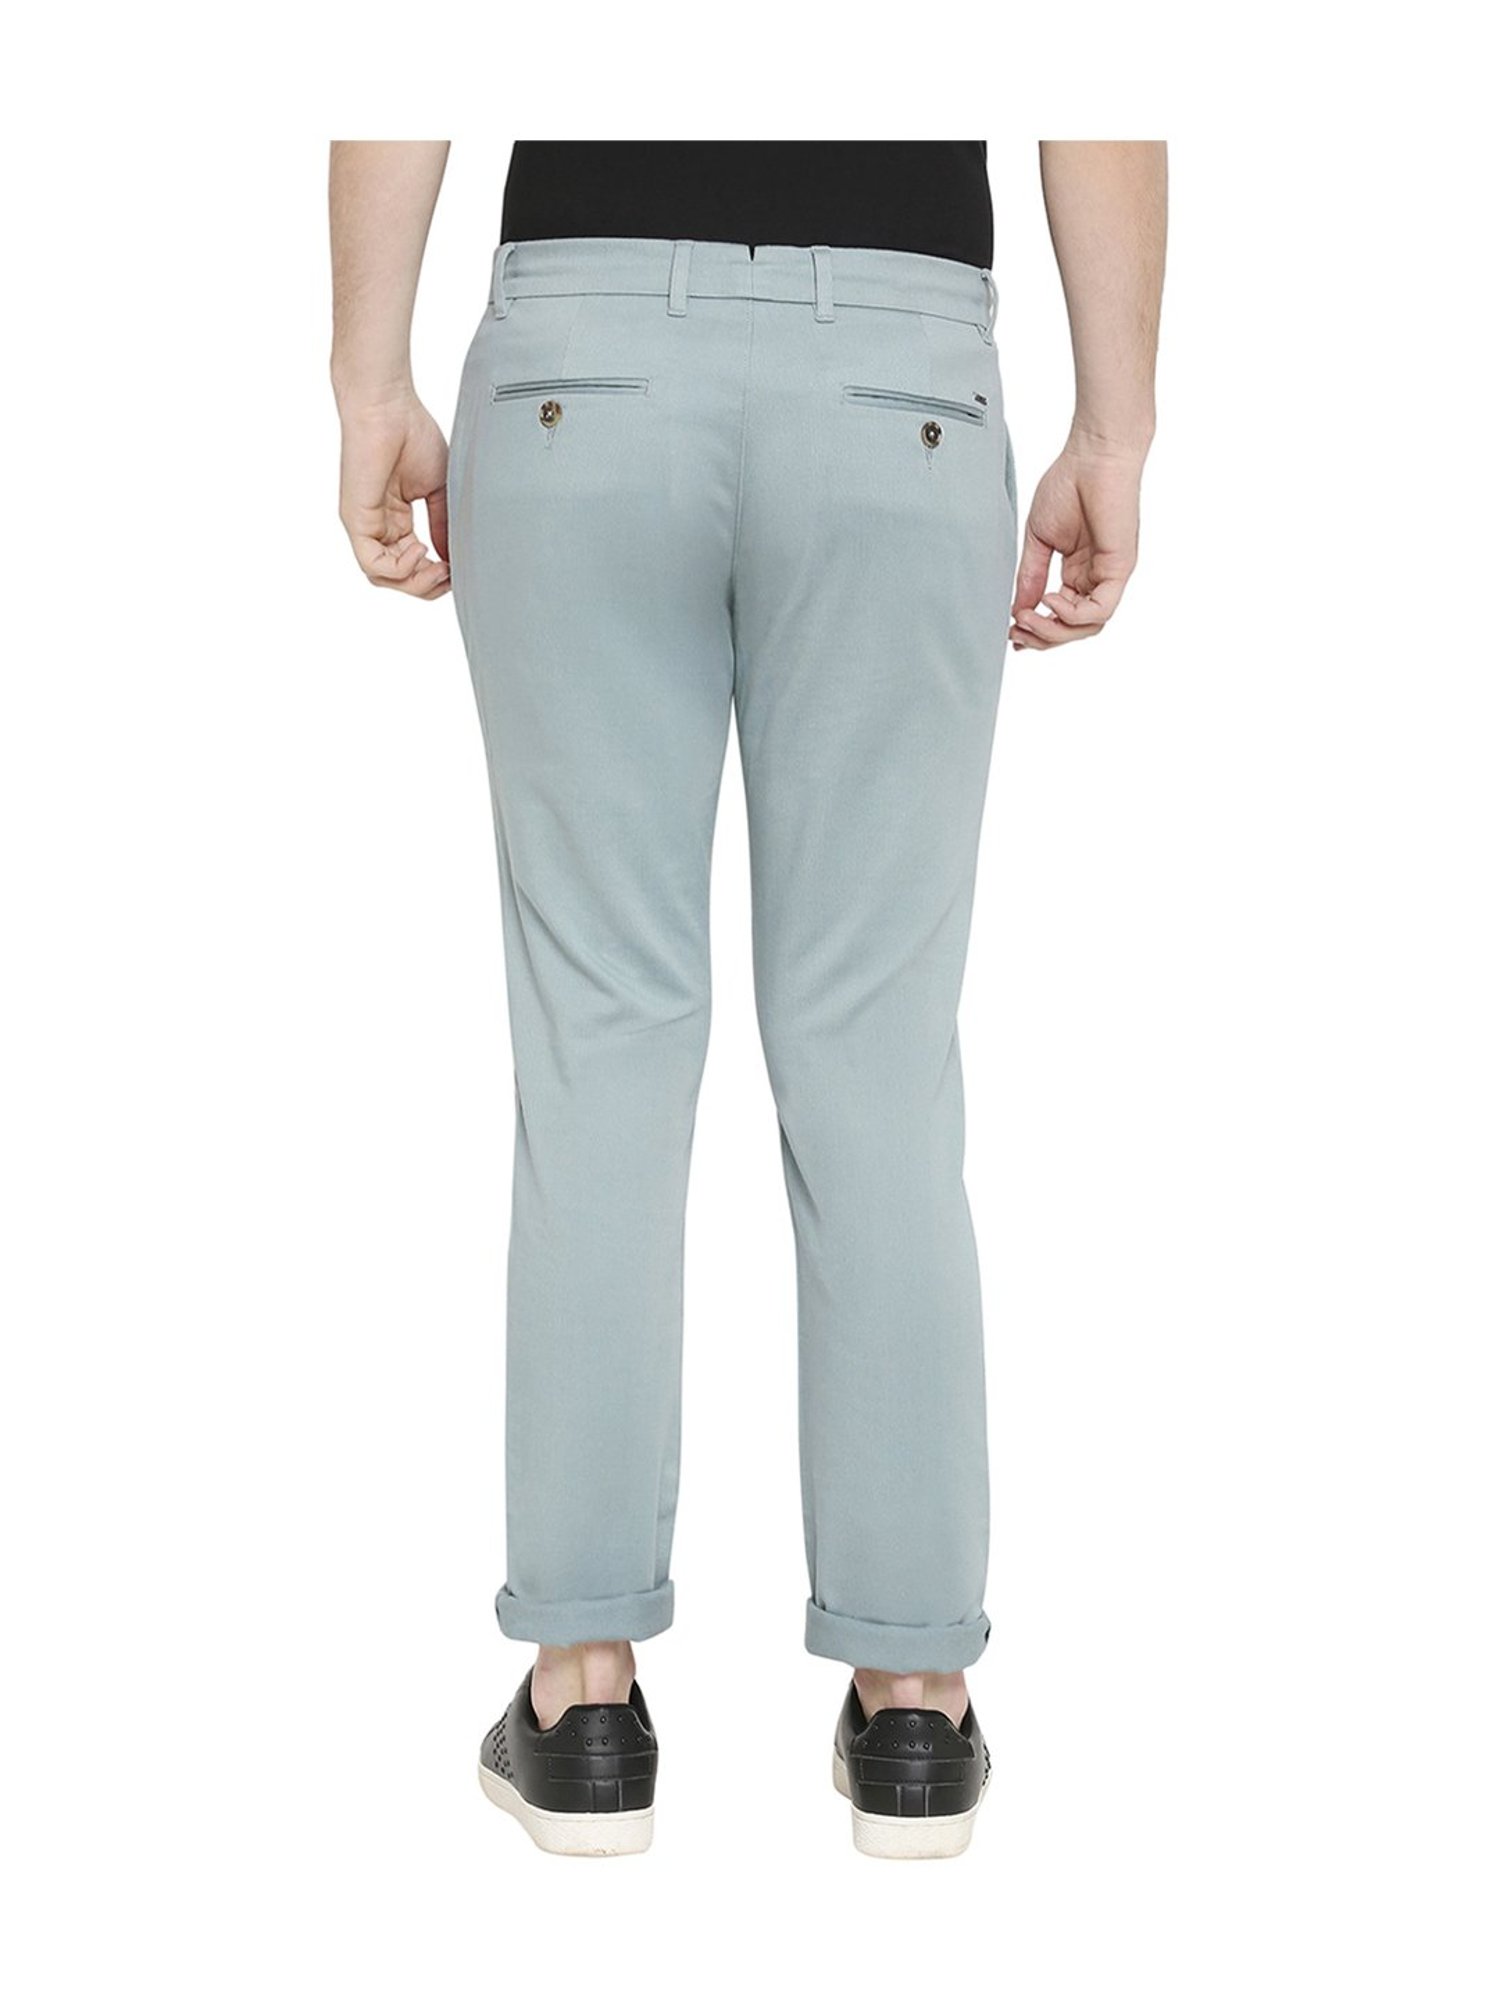 Buy RODAMO Solid Cotton Stretch Slim Fit Mens Trousers  Shoppers Stop